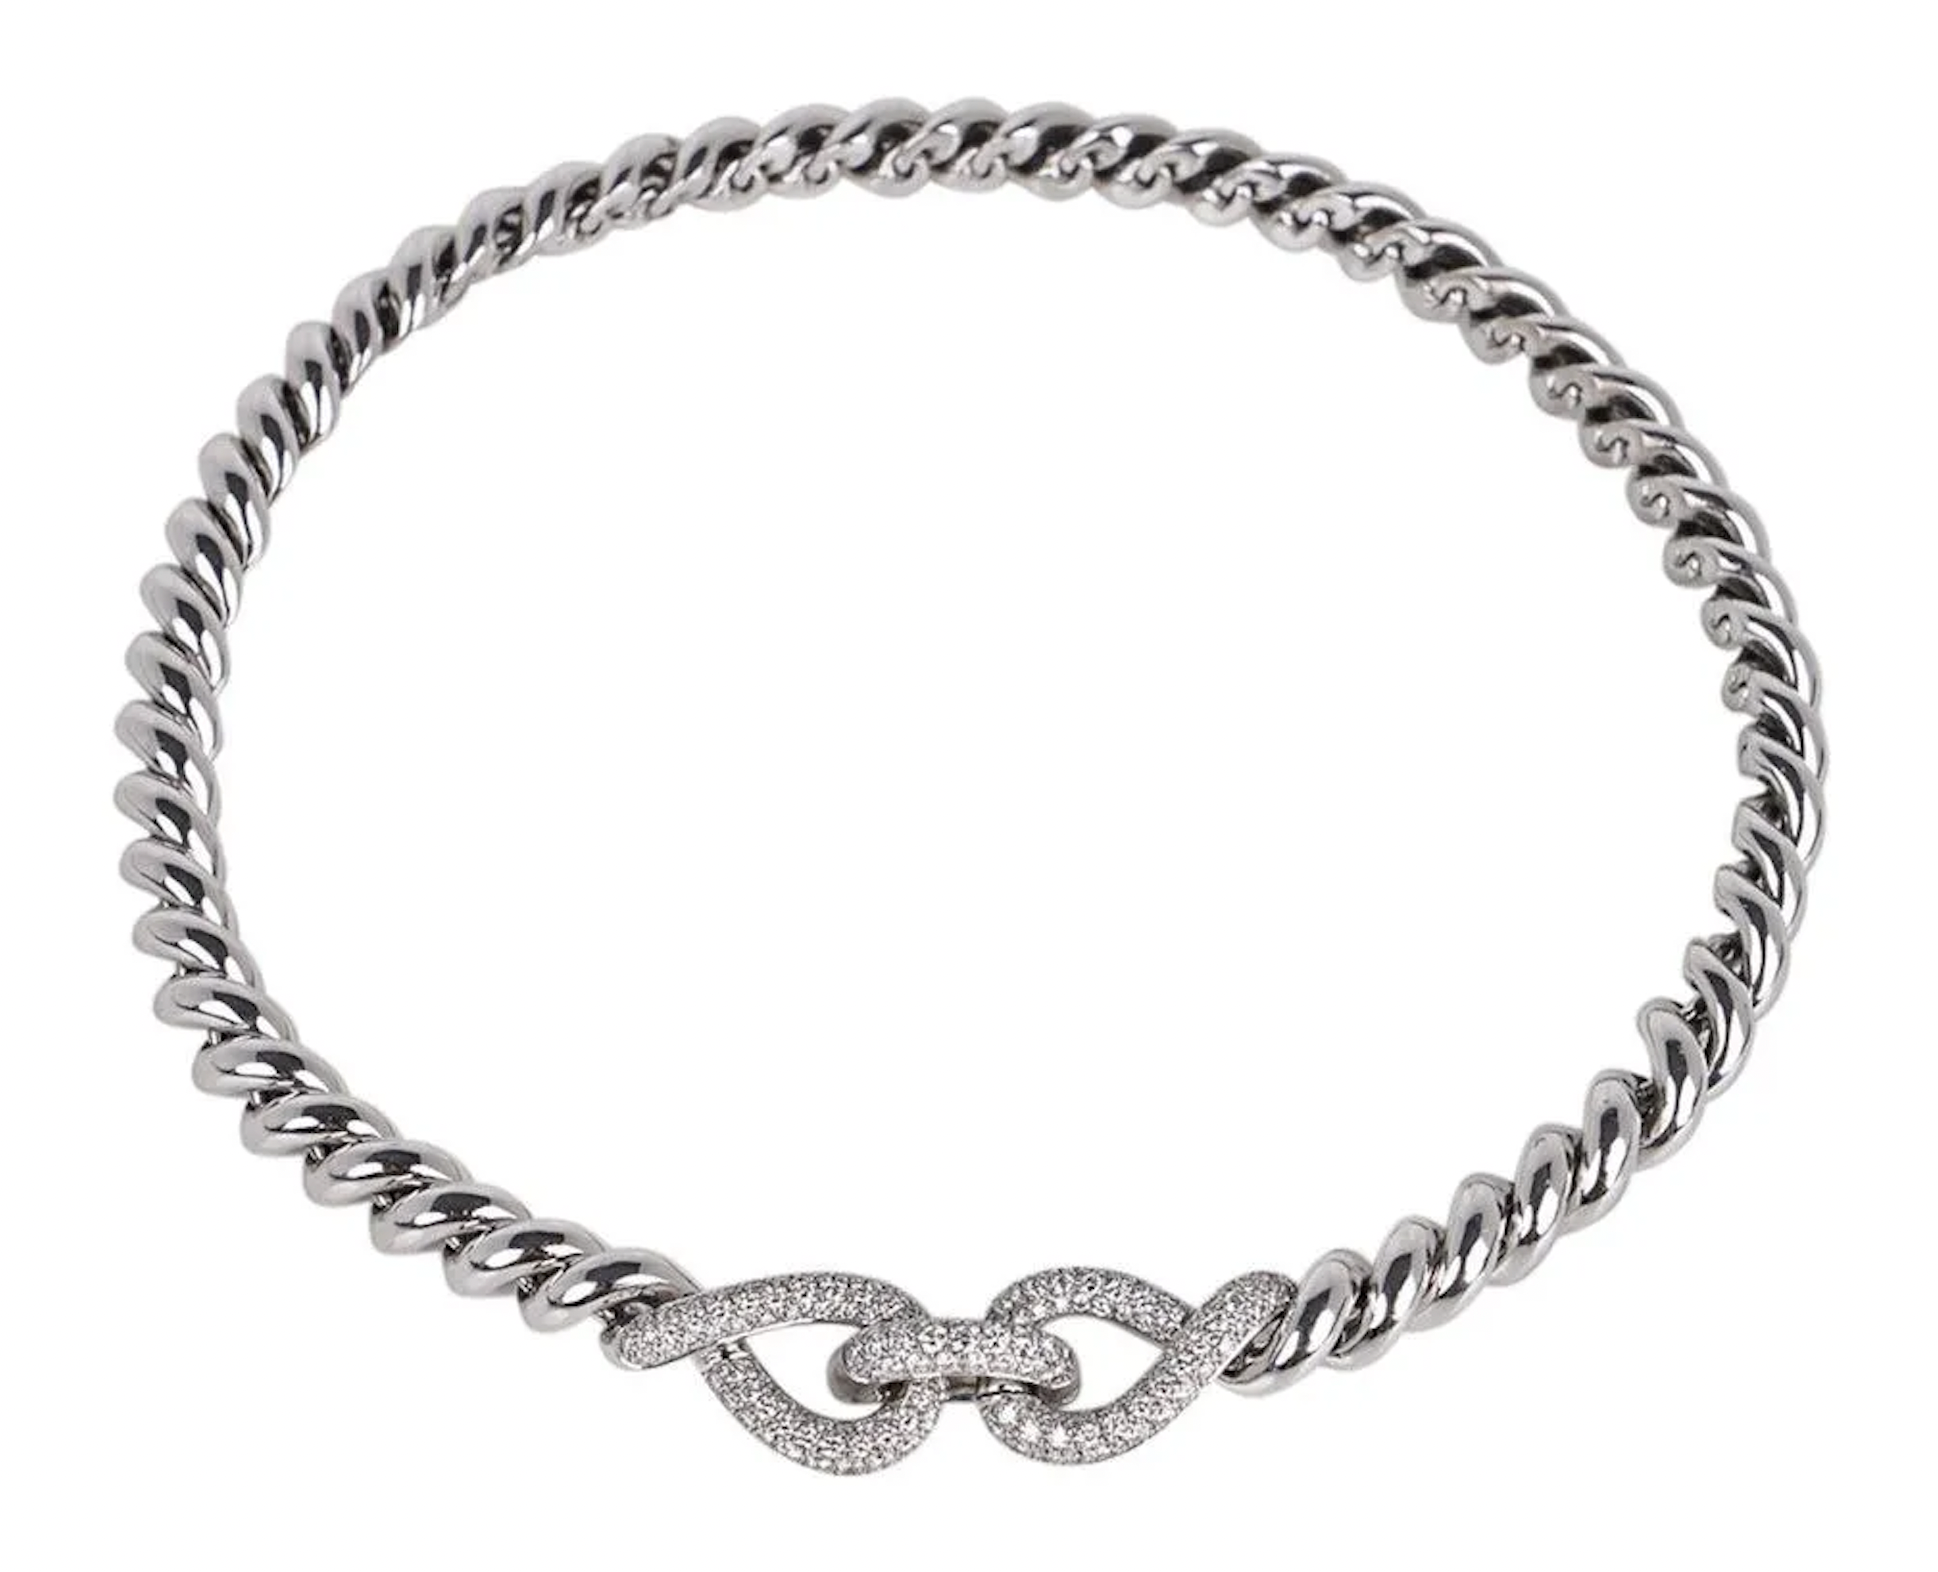 Hermes Torsade 18K white gold choker-style necklace with 5.33 carats of diamonds, $48,000-$58,000